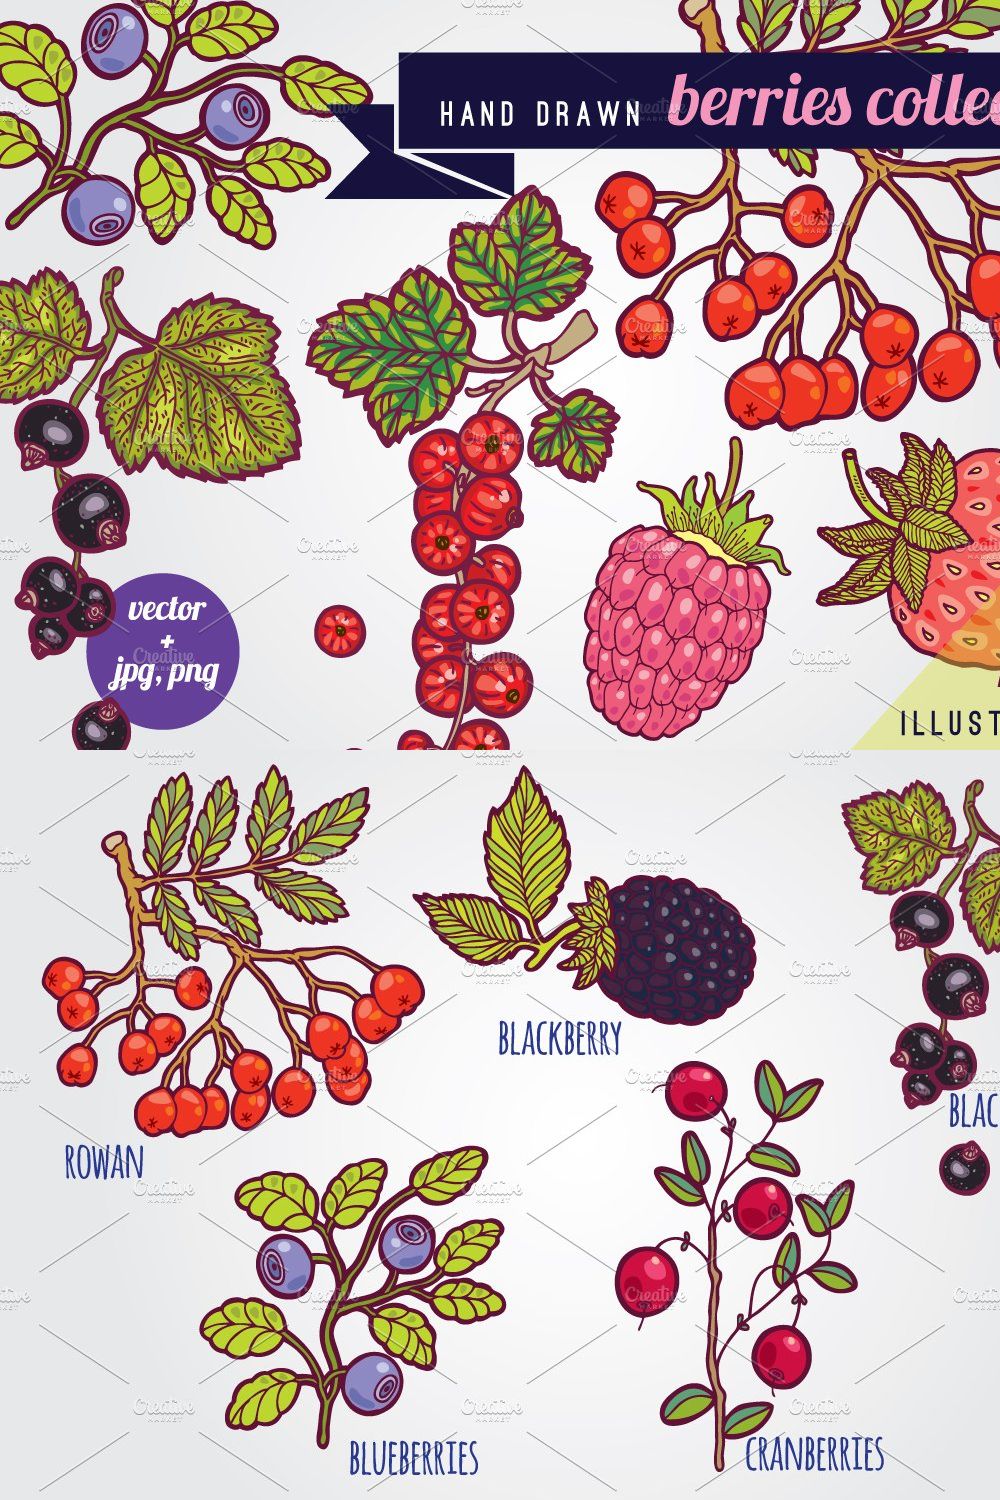 Hand drawn berries illustrations. pinterest preview image.